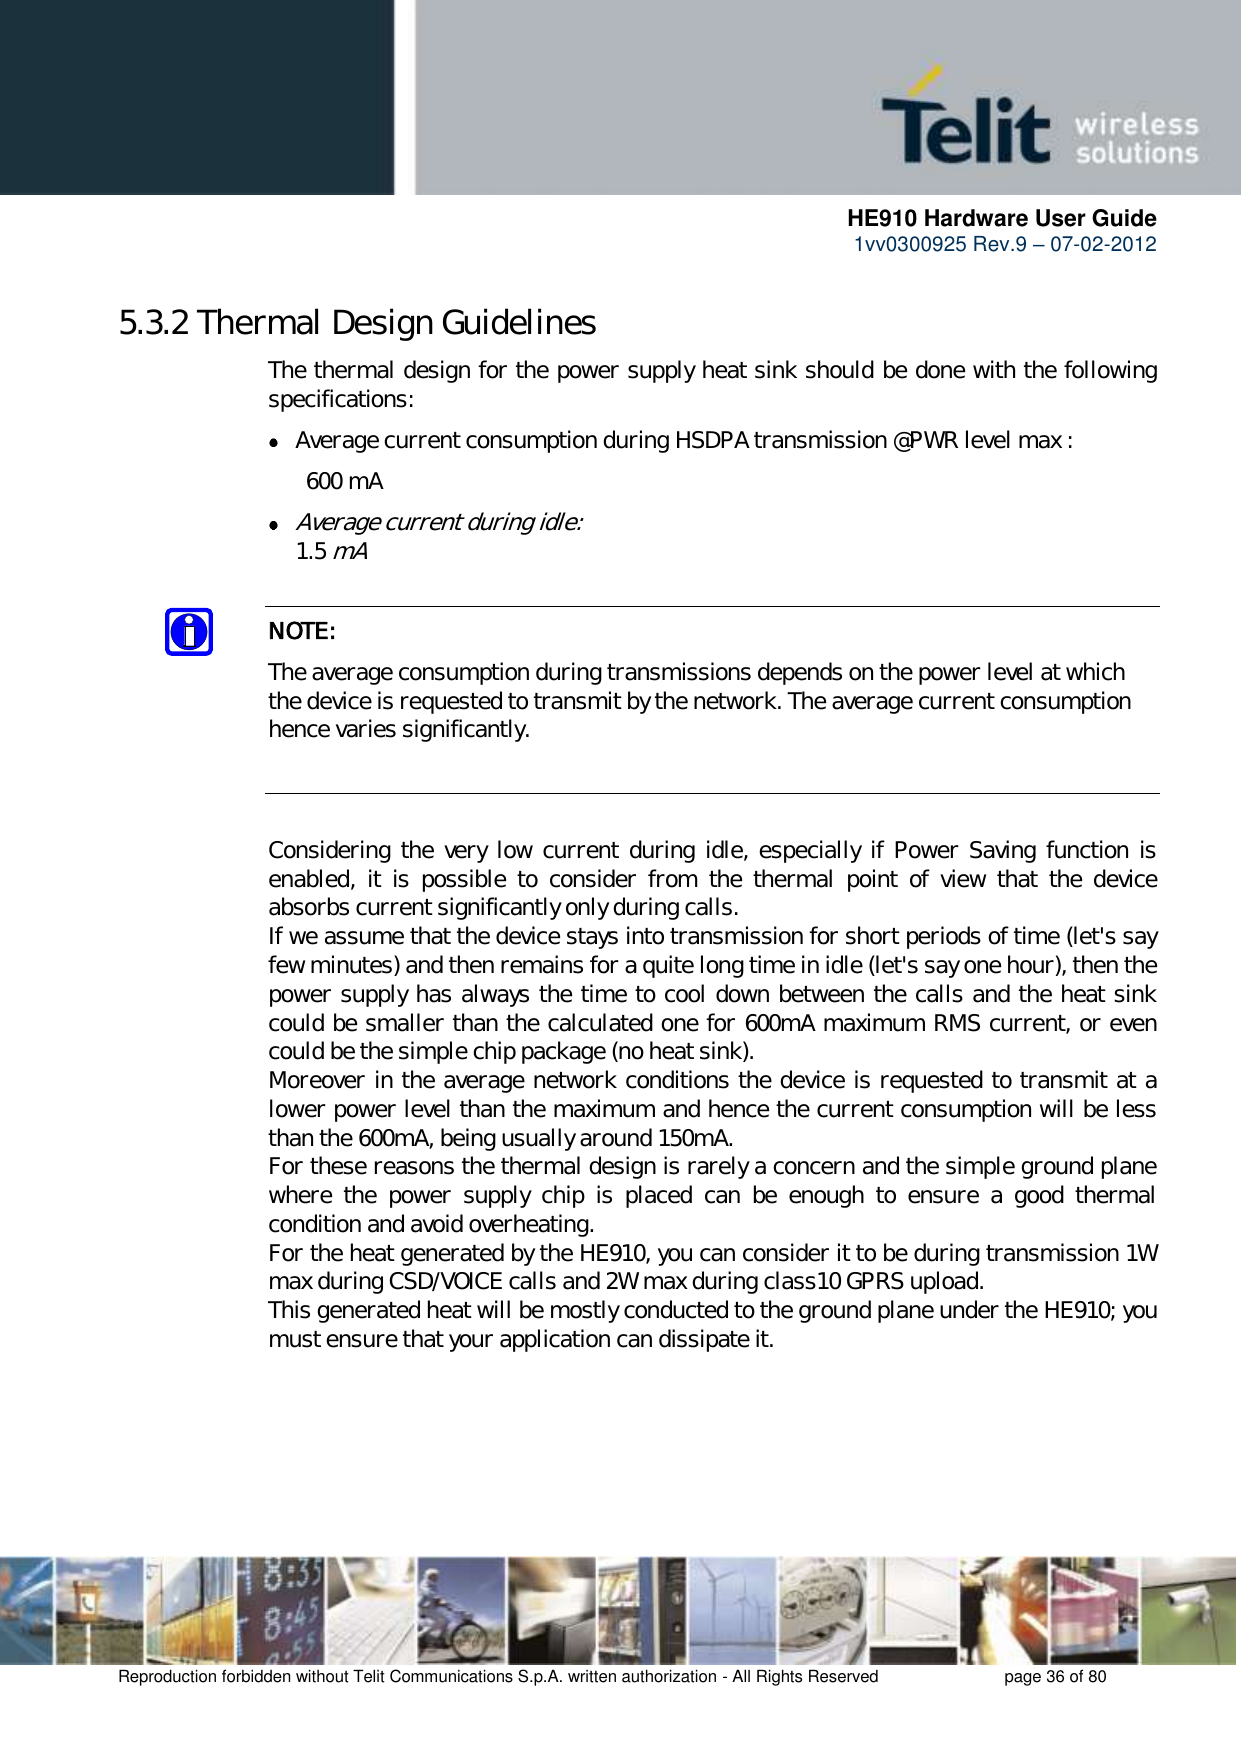      HE910 Hardware User Guide 1vv0300925 Rev.9 – 07-02-2012    Reproduction forbidden without Telit Communications S.p.A. written authorization - All Rights Reserved    page 36 of 80  5.3.2 Thermal Design Guidelines The thermal design for the power supply heat sink should be done with the following specifications:  Average current consumption during HSDPA transmission @PWR level max :   600 mA  Average current during idle:   1.5 mA  NOTE: The average consumption during transmissions depends on the power level at which the device is requested to transmit by the network. The average current consumption hence varies significantly.   Considering the  very low  current during idle, especially if  Power Saving function  is enabled,  it  is  possible  to  consider  from  the  thermal  point  of  view  that  the  device absorbs current significantly only during calls.  If we assume that the device stays into transmission for short periods of time (let&apos;s say few minutes) and then remains for a quite long time in idle (let&apos;s say one hour), then the power supply has always the time to cool down between the calls and the heat sink could be smaller than the calculated one for 600mA maximum RMS current, or even could be the simple chip package (no heat sink). Moreover in the average network conditions the device is requested to transmit at a lower power level than the maximum and hence the current consumption will be less than the 600mA, being usually around 150mA. For these reasons the thermal design is rarely a concern and the simple ground plane where  the  power  supply  chip  is  placed  can  be  enough  to  ensure  a  good  thermal condition and avoid overheating.  For the heat generated by the HE910, you can consider it to be during transmission 1W max during CSD/VOICE calls and 2W max during class10 GPRS upload.  This generated heat will be mostly conducted to the ground plane under the HE910; you must ensure that your application can dissipate it.  